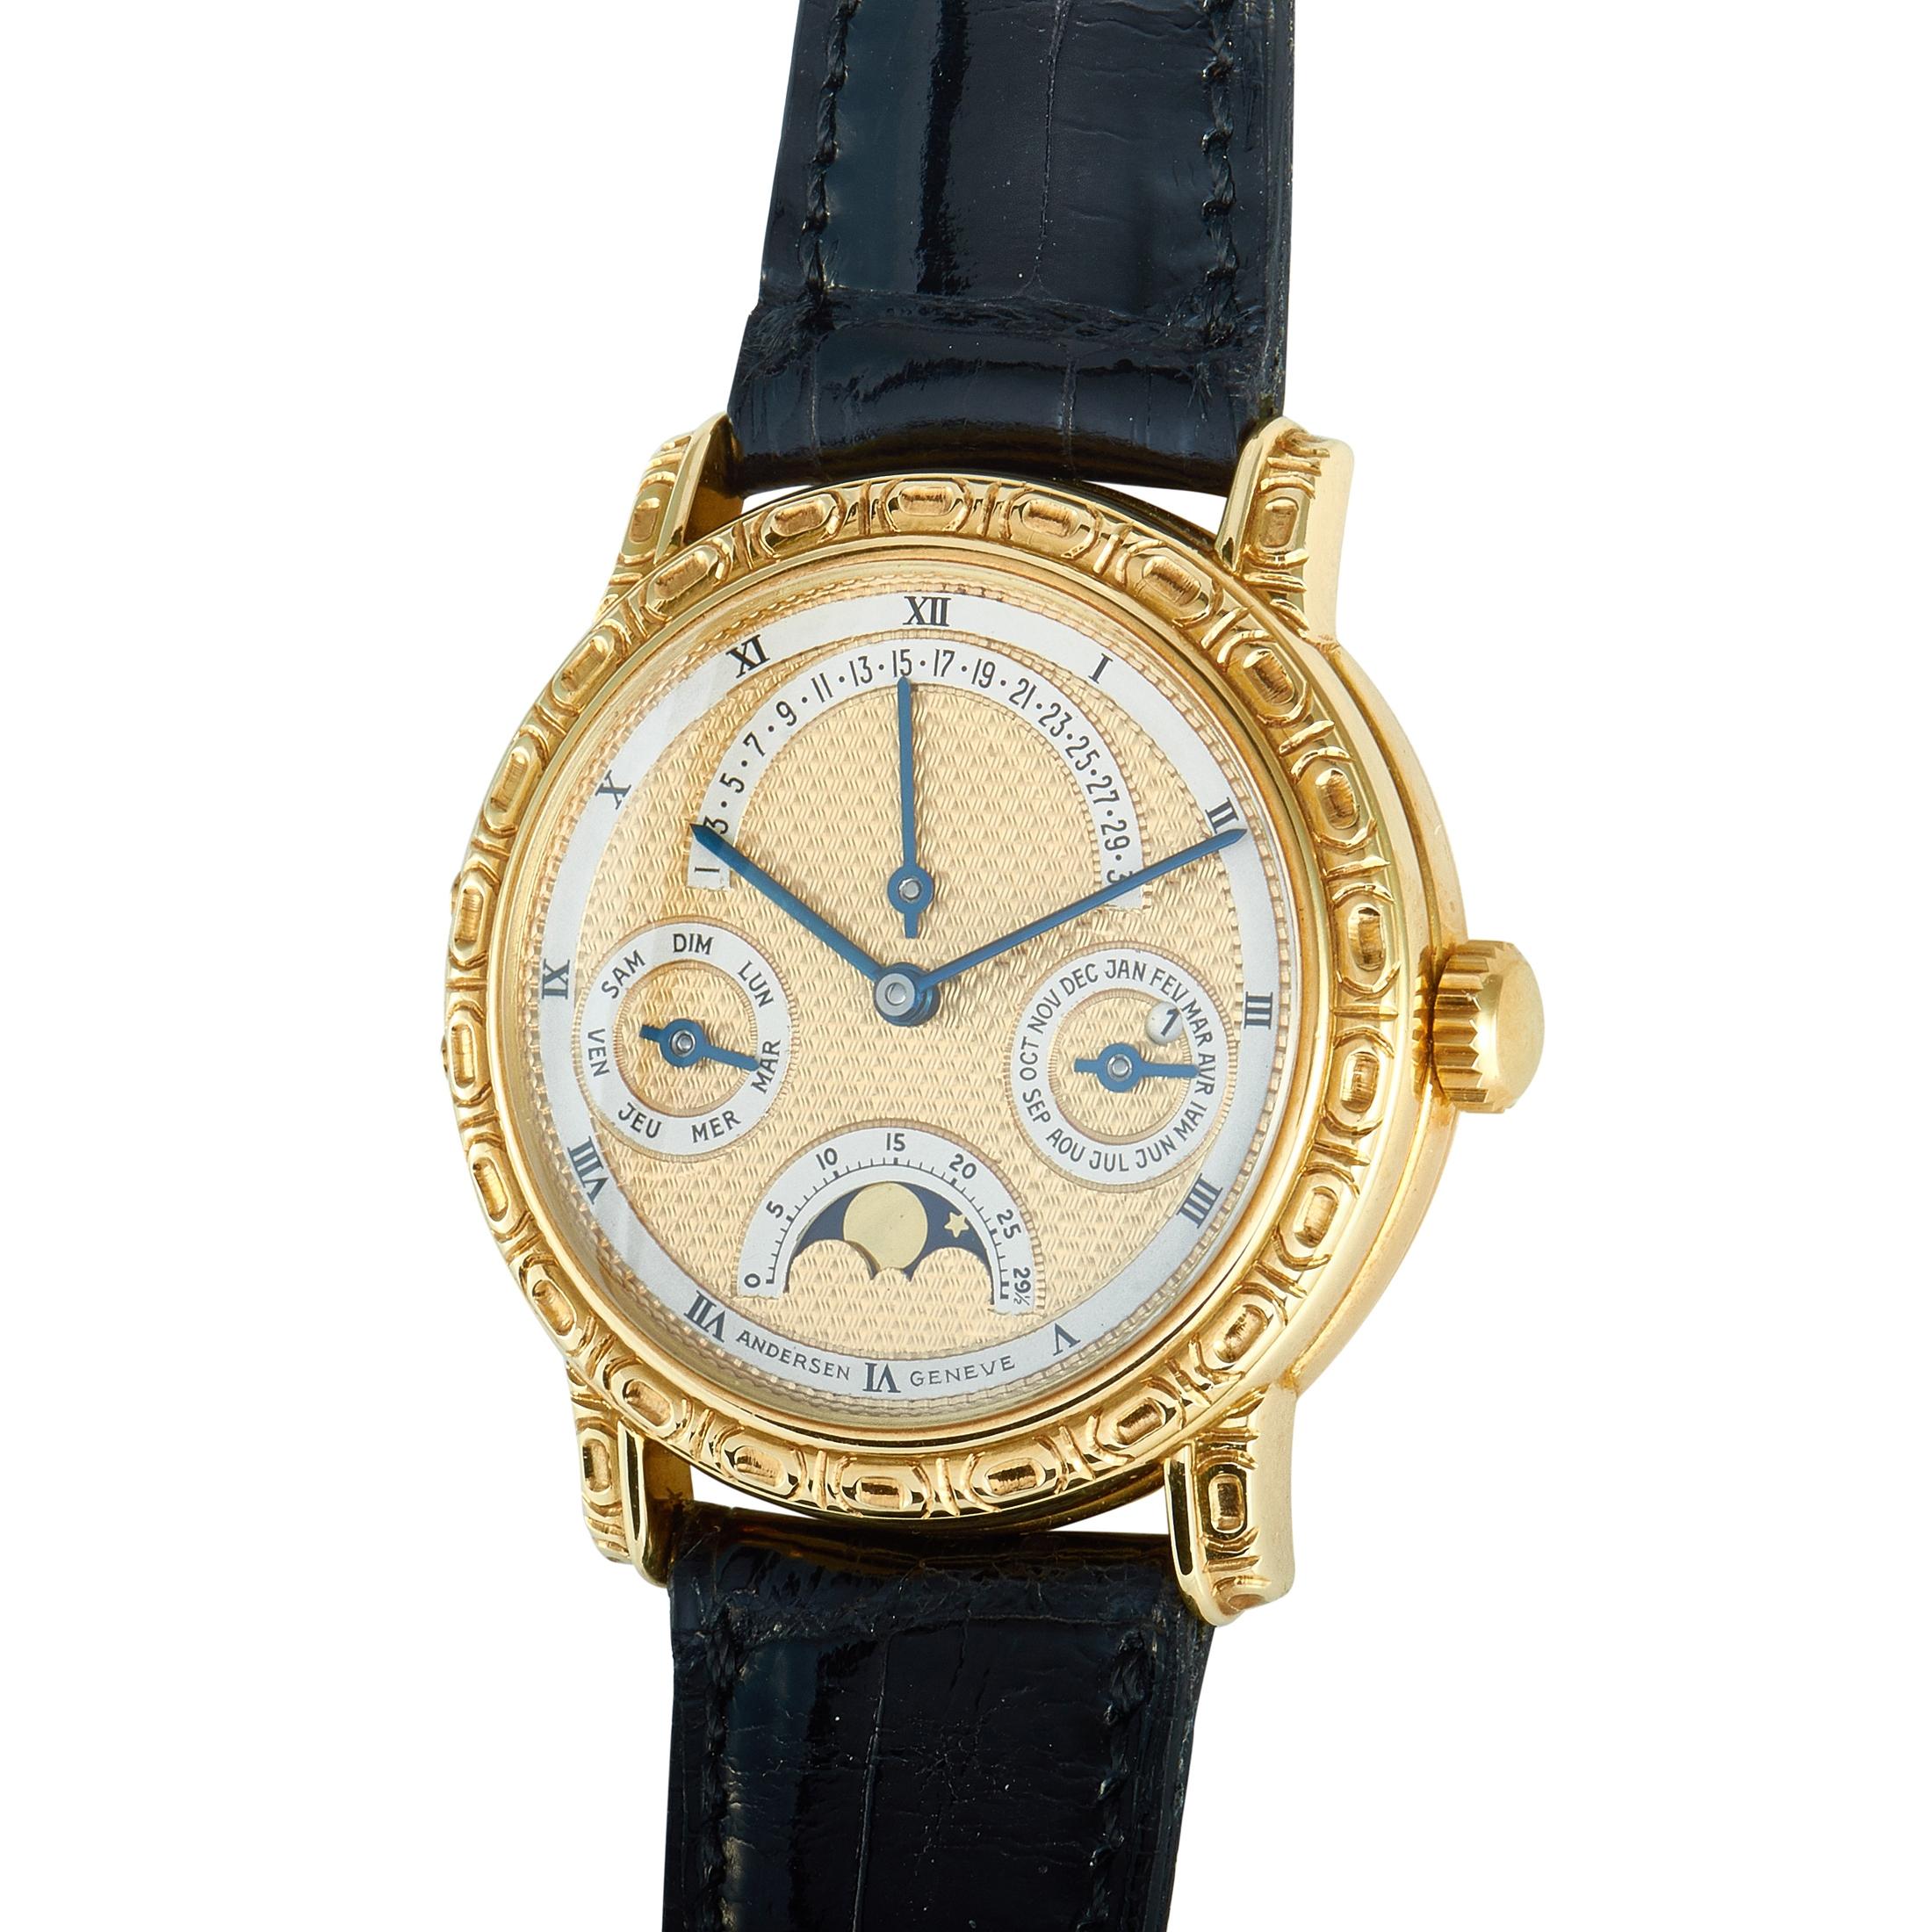 The Svend Andersen Perpetual Calendar watch, reference number 56363, is a piece unique and is presented with an 18K yellow gold case that boasts see-through back. This timepiece is powered by a hand-wound movement and features the following